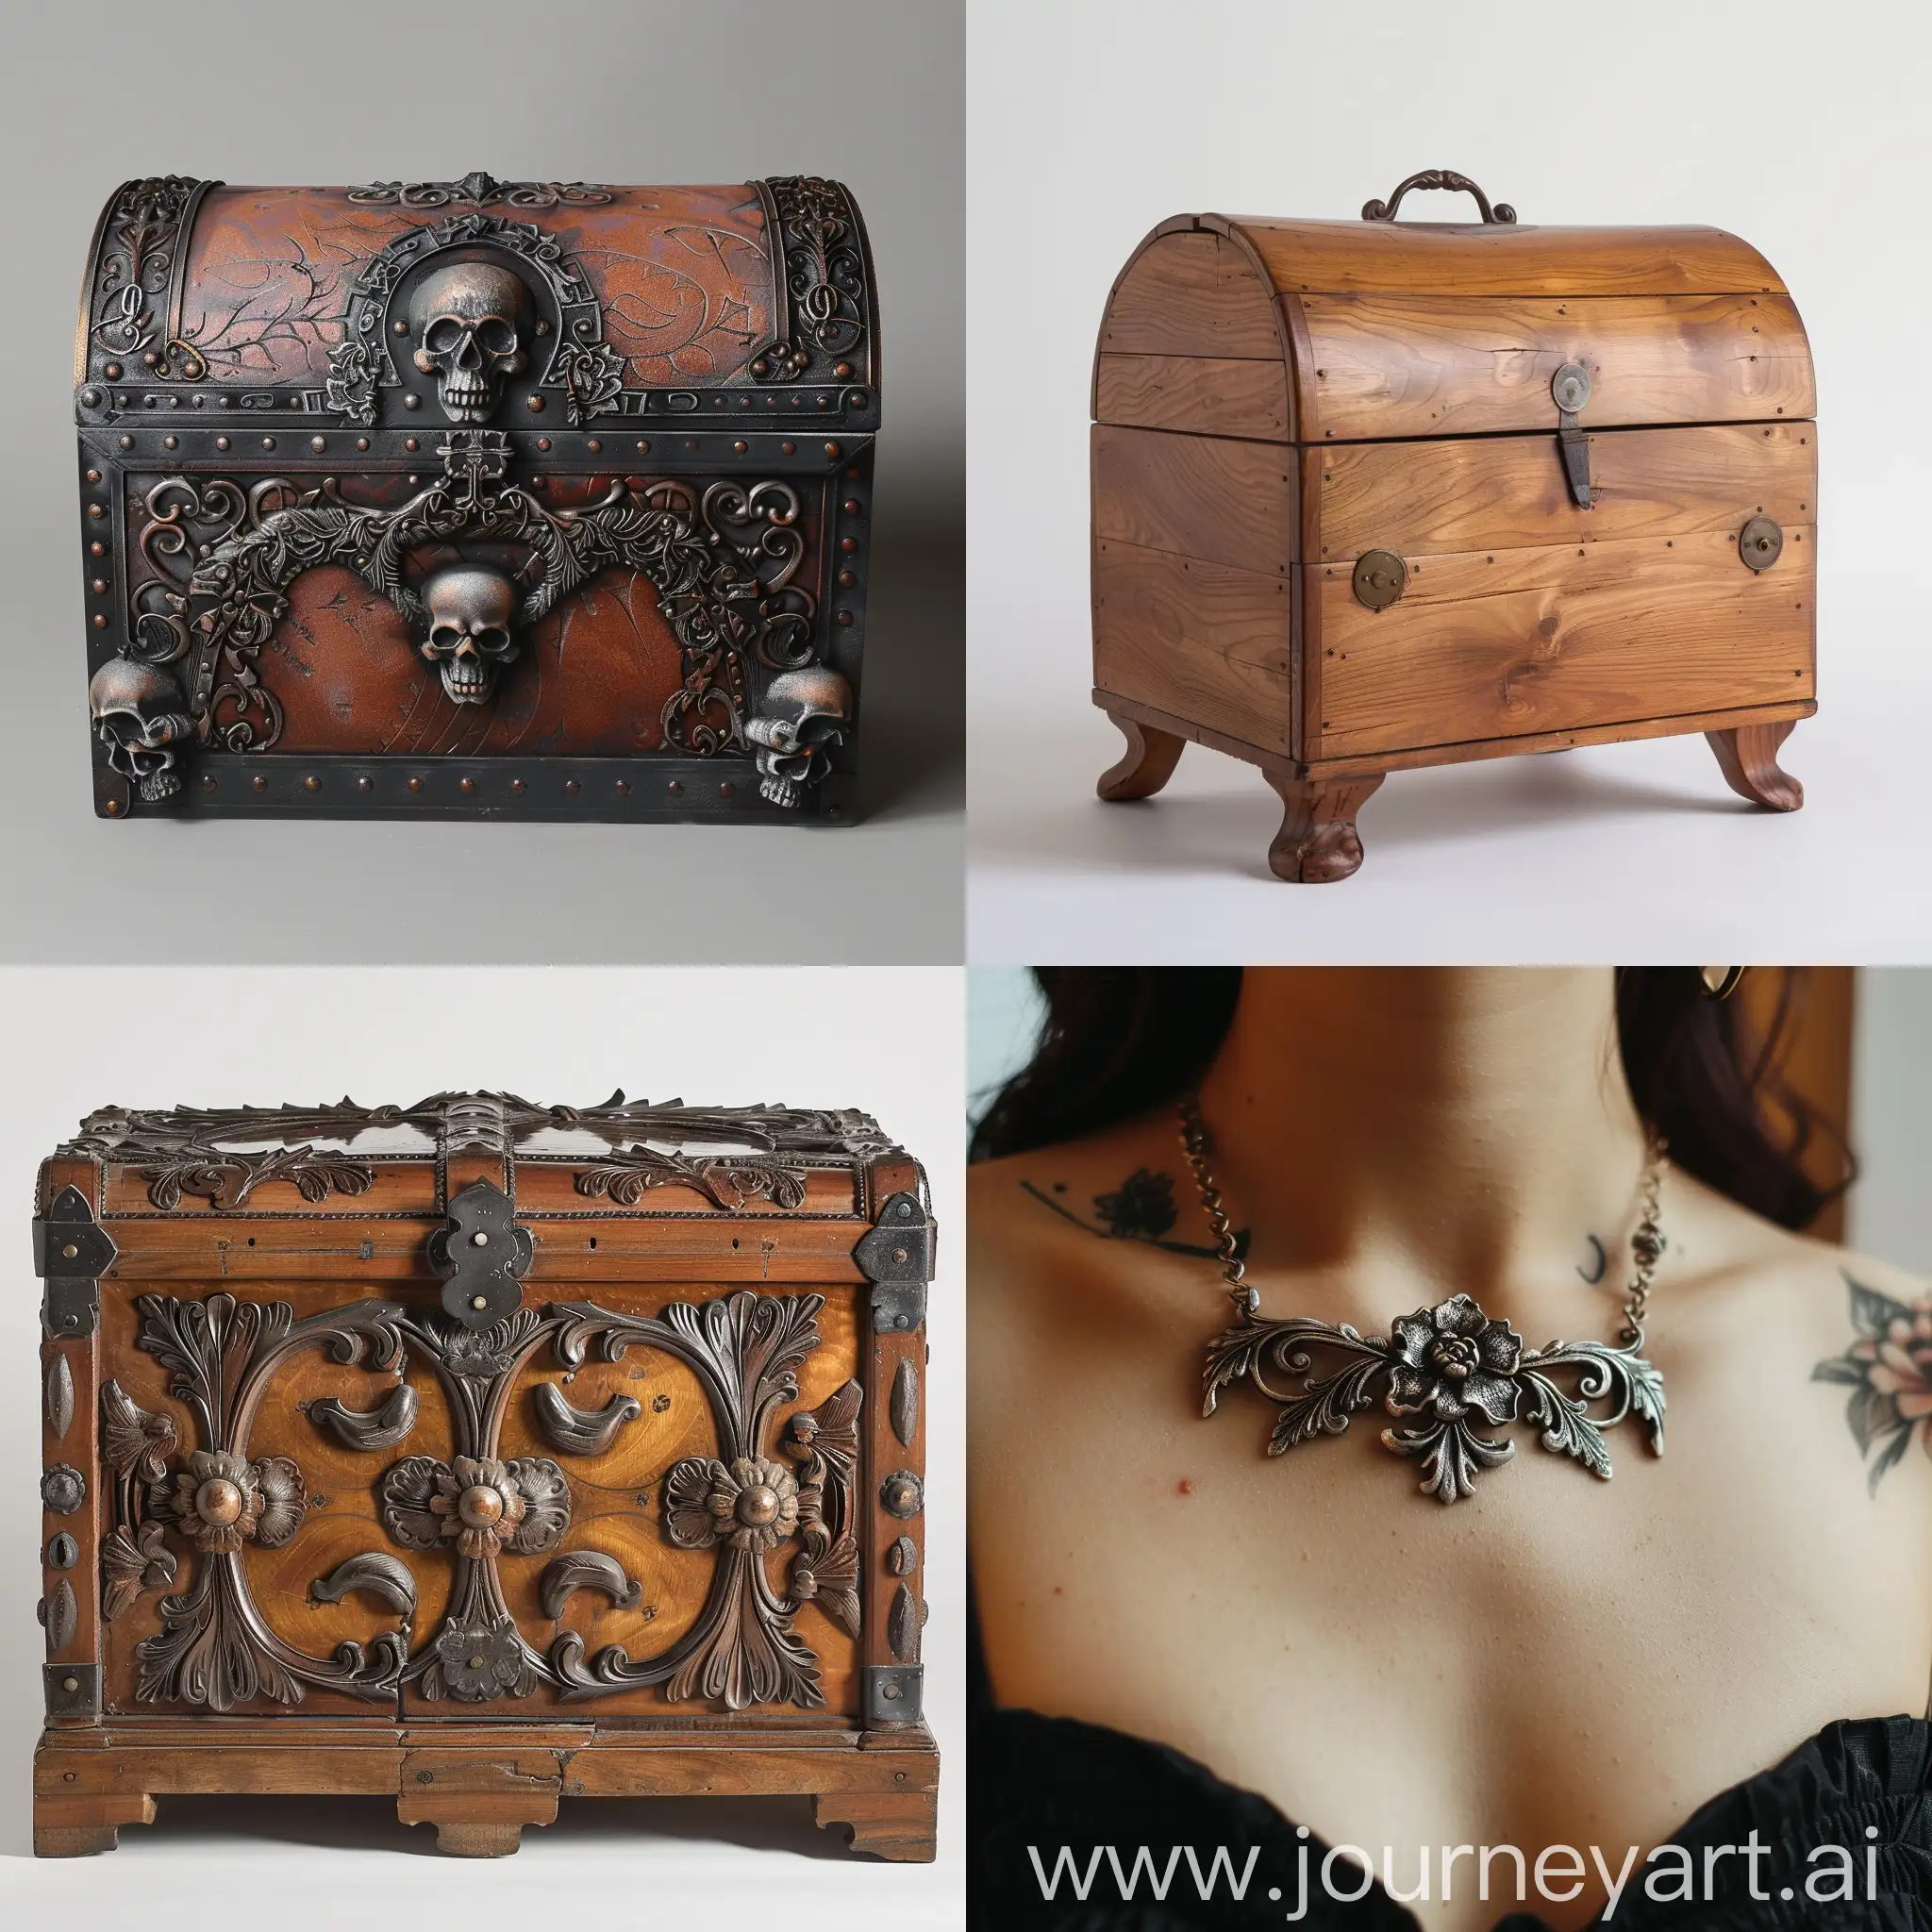 Vintage-Treasure-Chest-with-Ornate-Details-and-Rustic-Charm